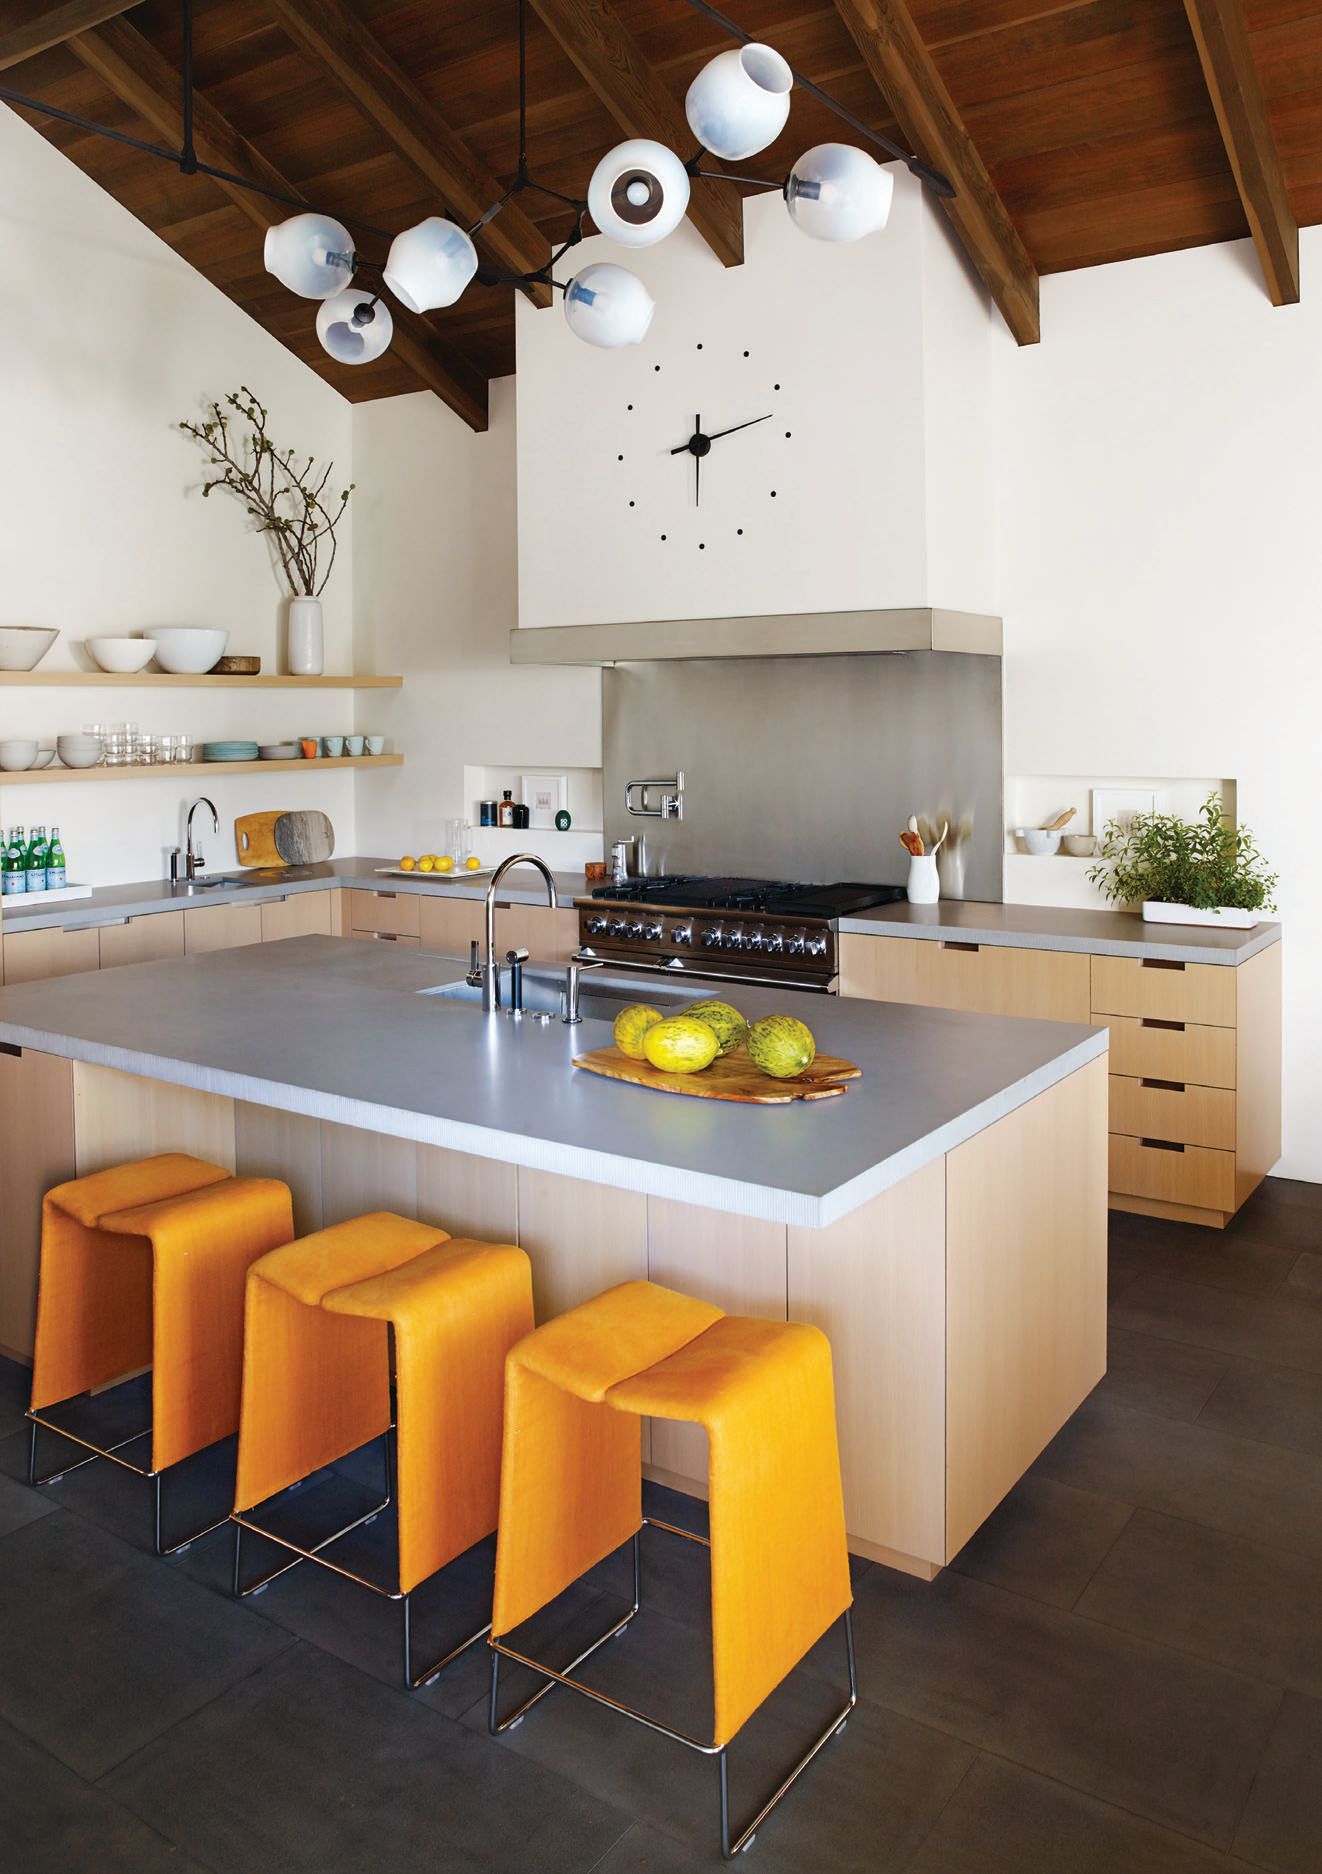 Lazy ’05 counter stools by B&B Italia in Christopher Hyland marigold fabric pair perfectly with the Lindsey Adelman Branching Bubble chandelier in the kitchen. PHOTOGRAPHED BY JAMES CARRIERE